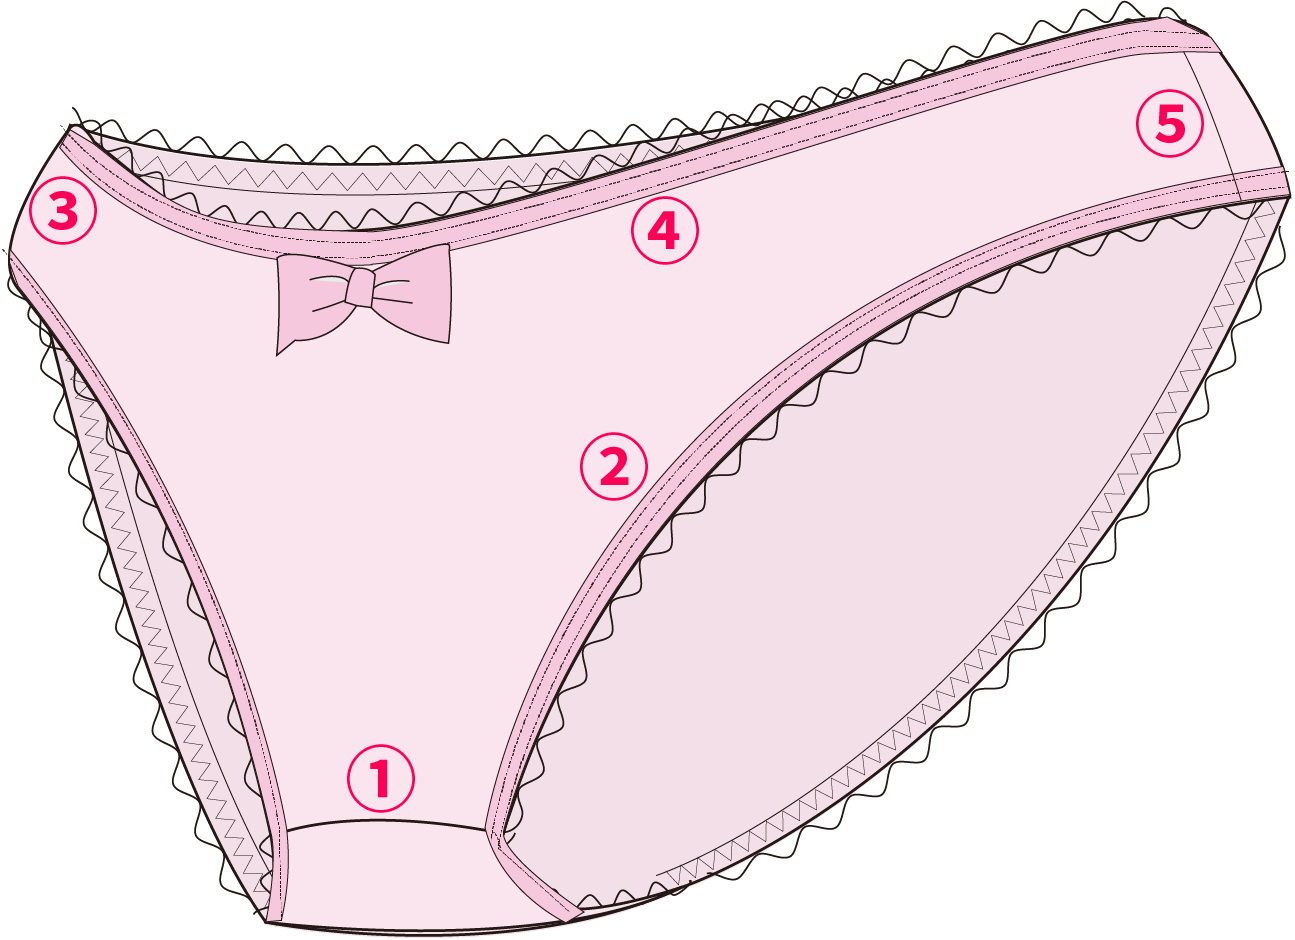 Ladies' Panty - Find Product by Garments, Products